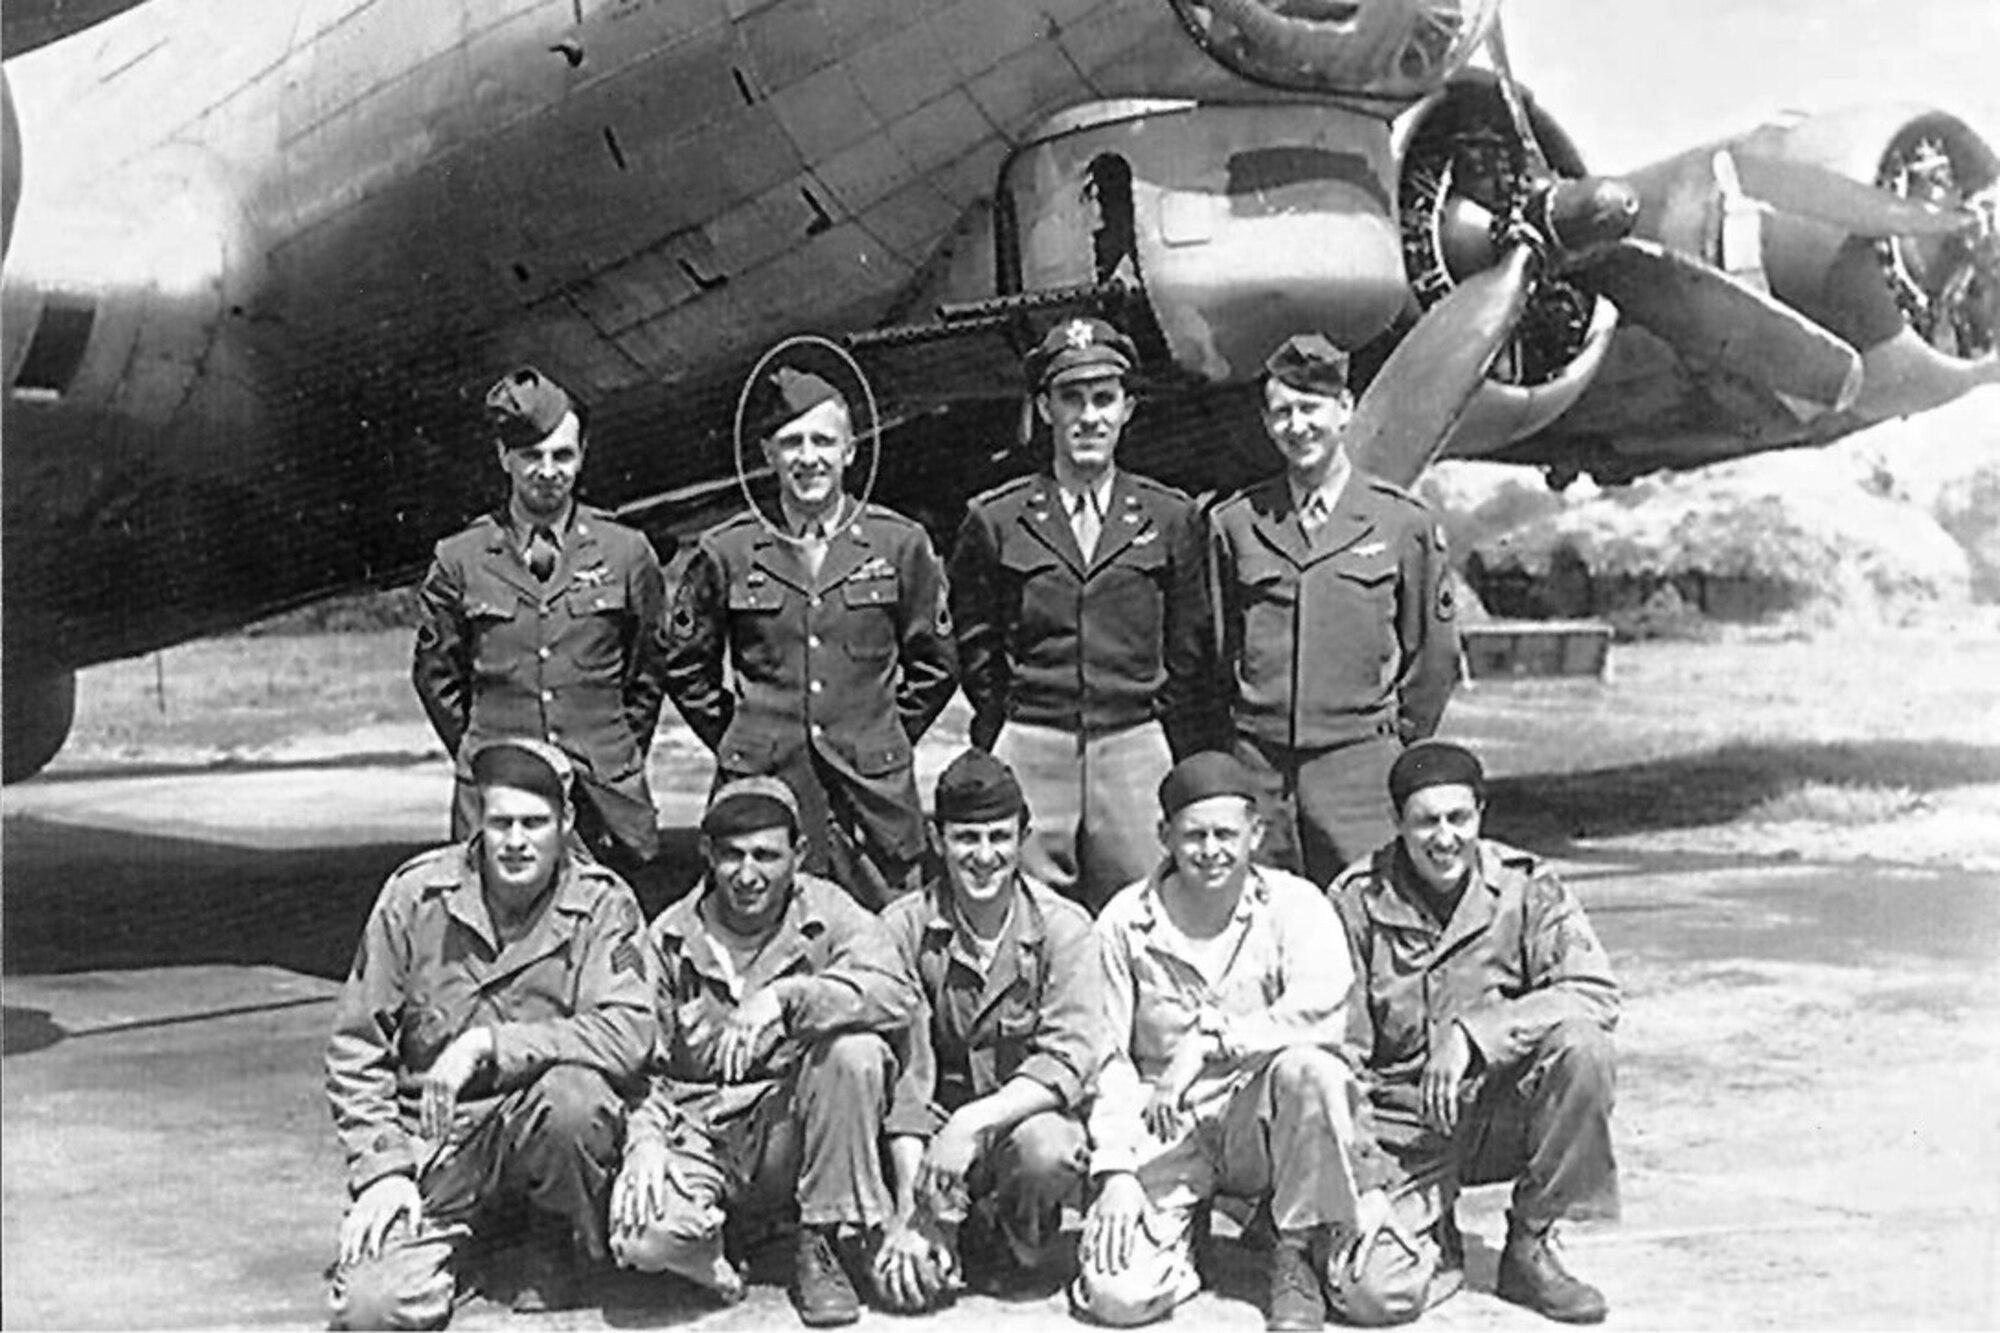 Tech. Sgt. Emil Dihlmann (circled) stands with a B-17 Flying Fortress crew before a mission during World War II. Dihlmann served at RAF Alconbury from 1943 to 1945 and he had such fond memories of his time there that his family asked if they could spread his ashes on the base after he passed away June 27 at the age of 96. (Photo courtesy of Emily Lewney)